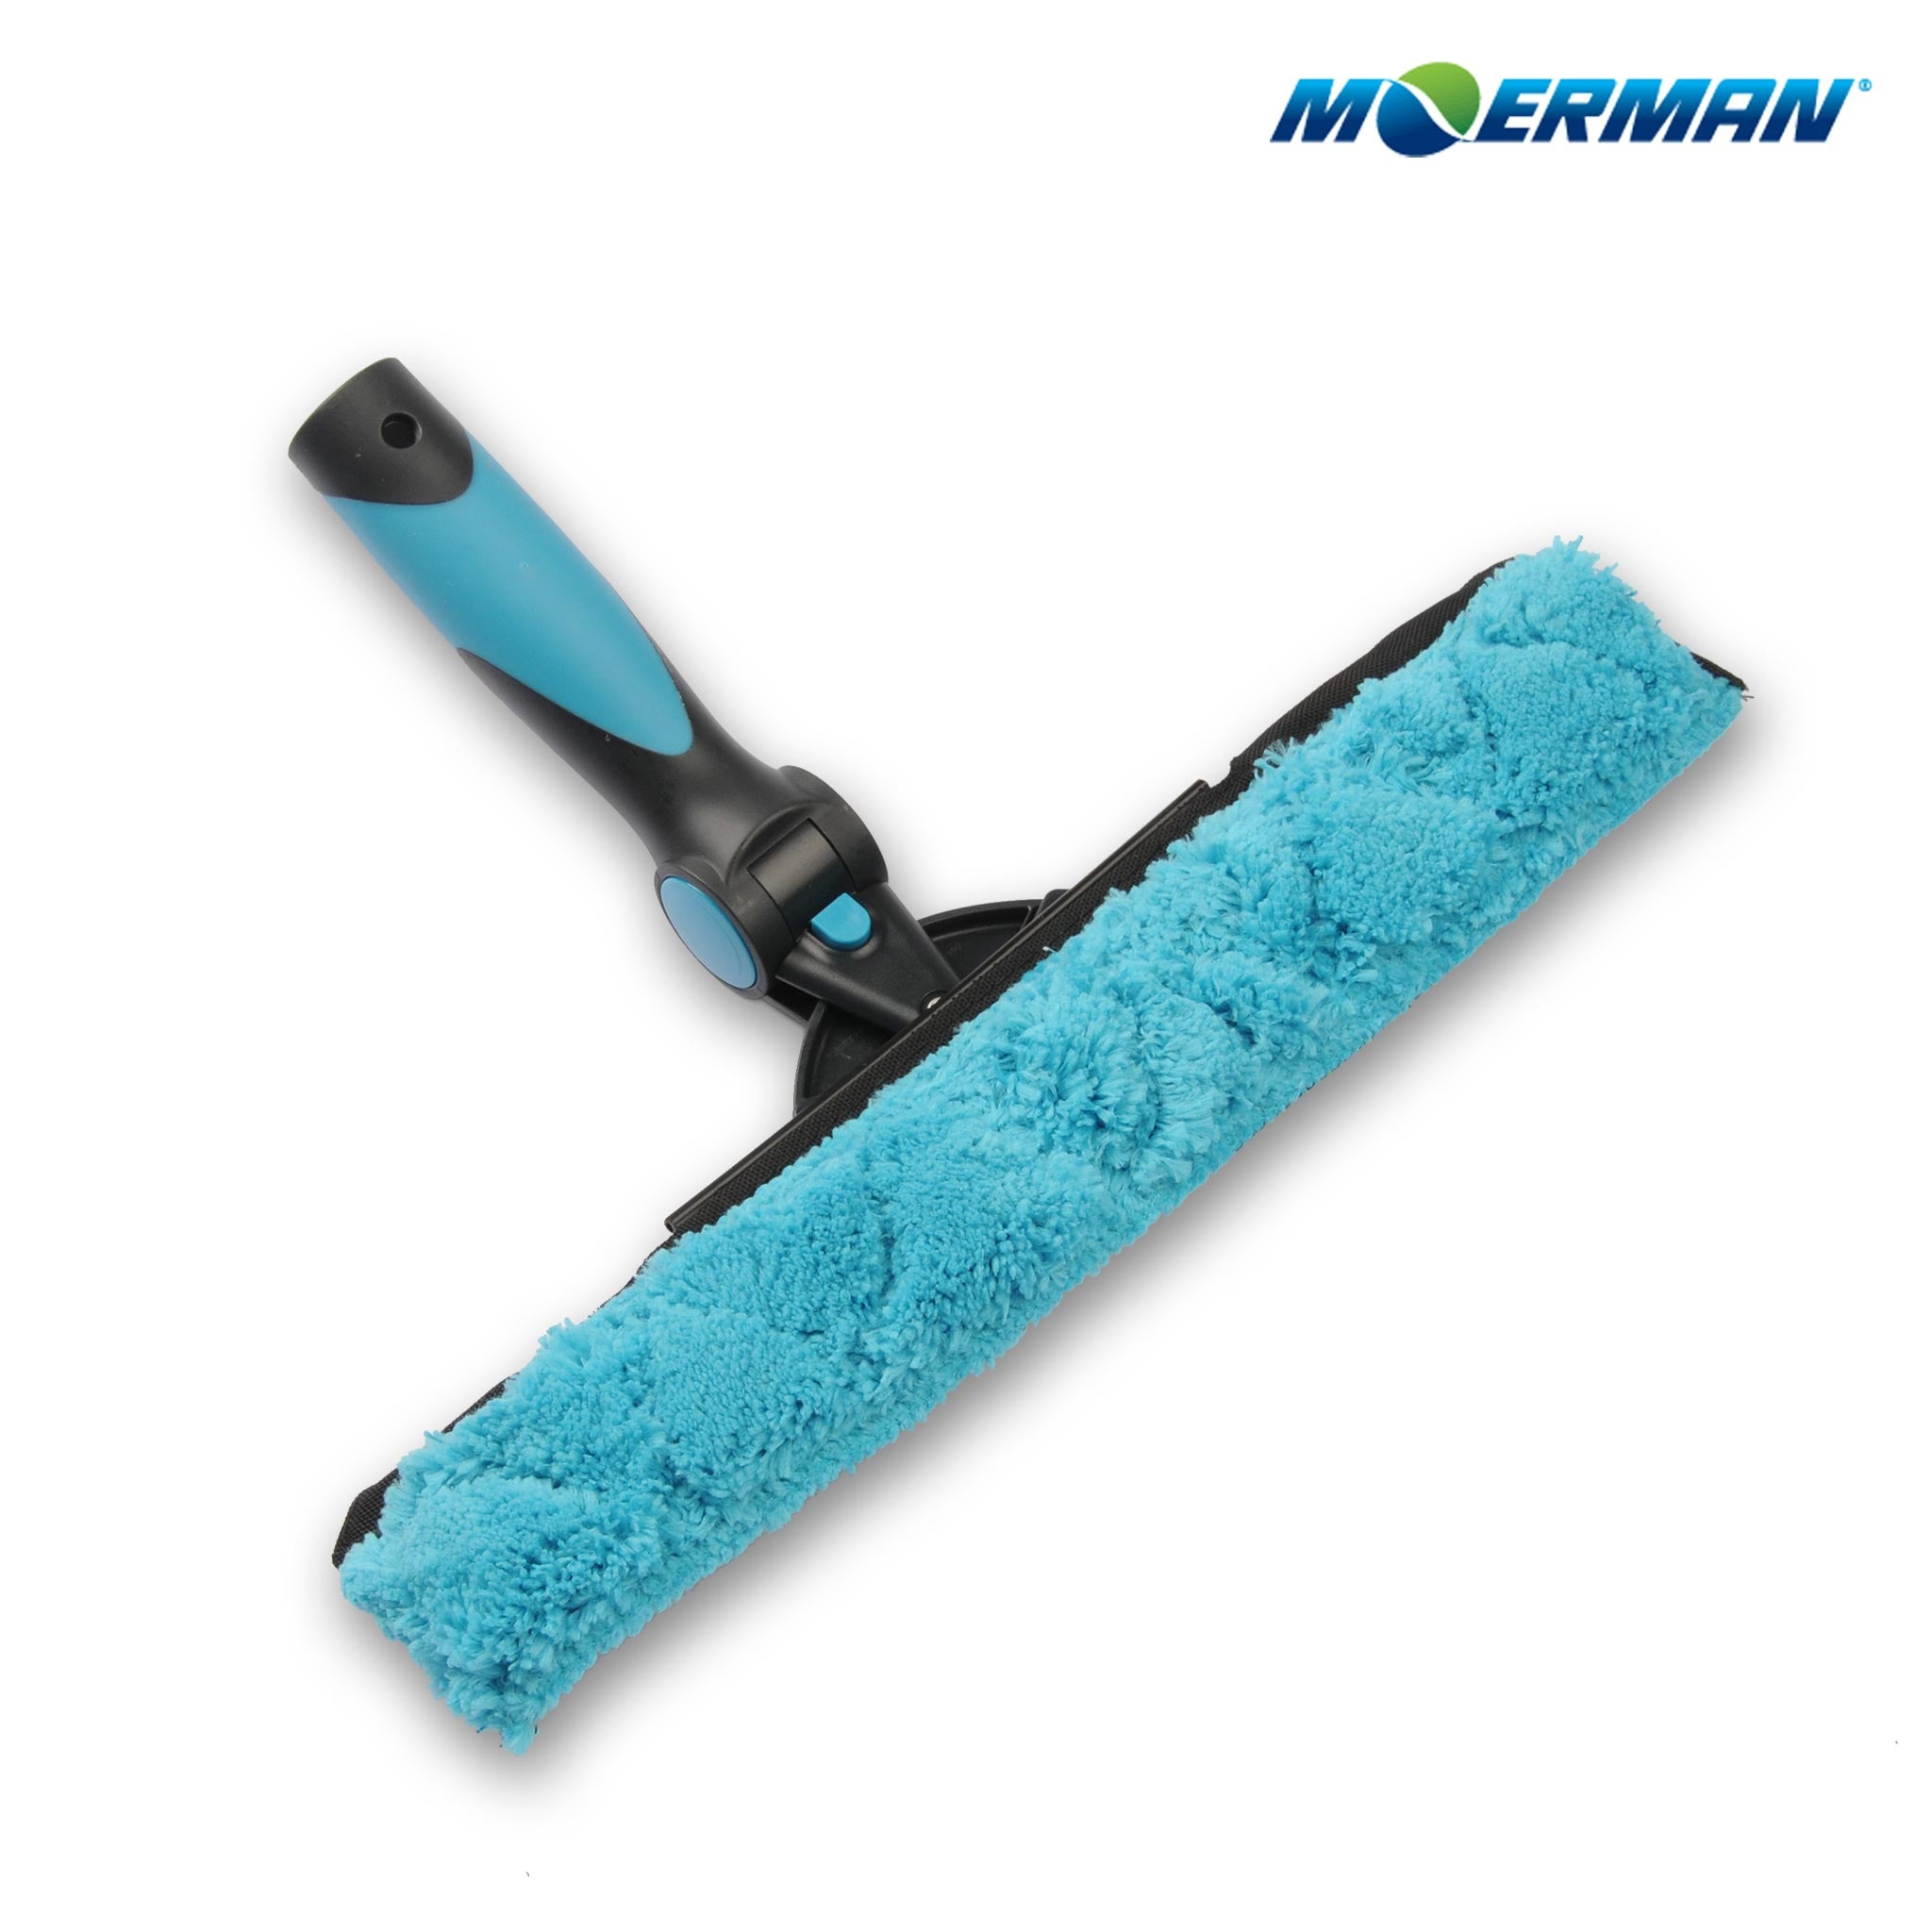 Moerman Excelerator 2.0 and Fliq Combo: Wash & Squeegee